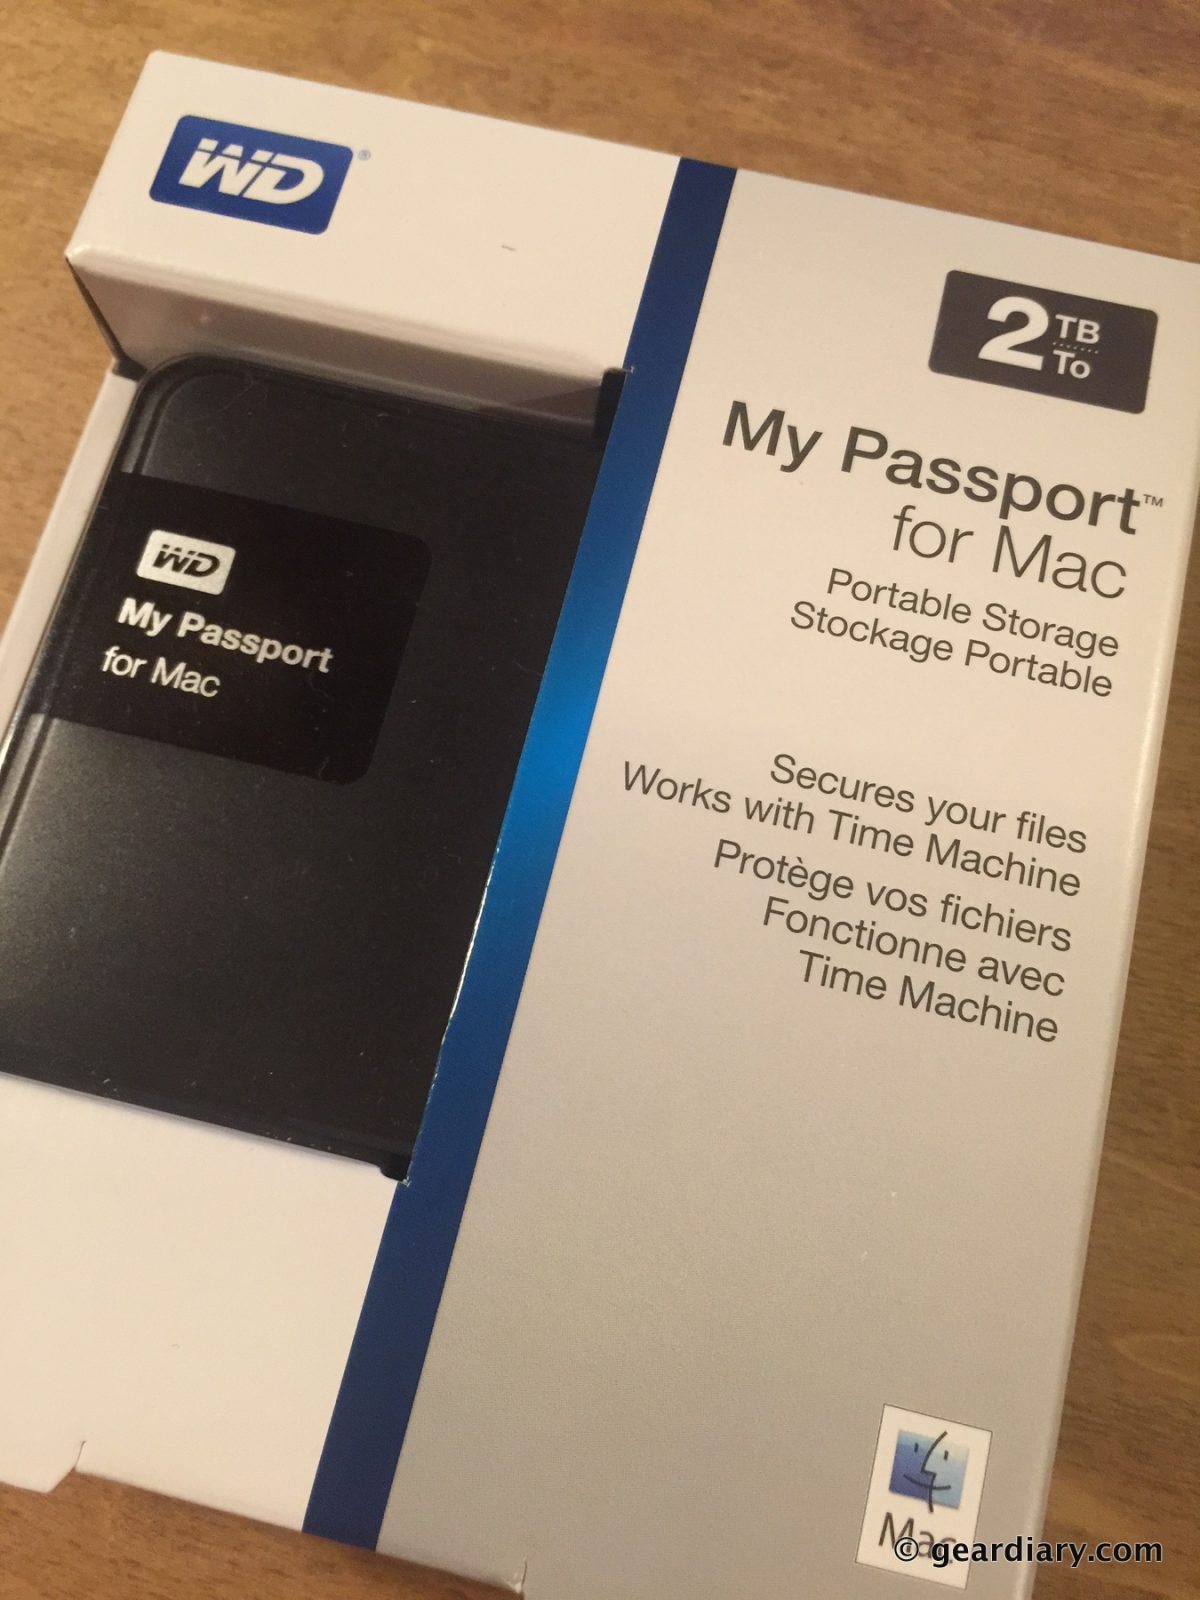 Wd my passport for mac 3tb review